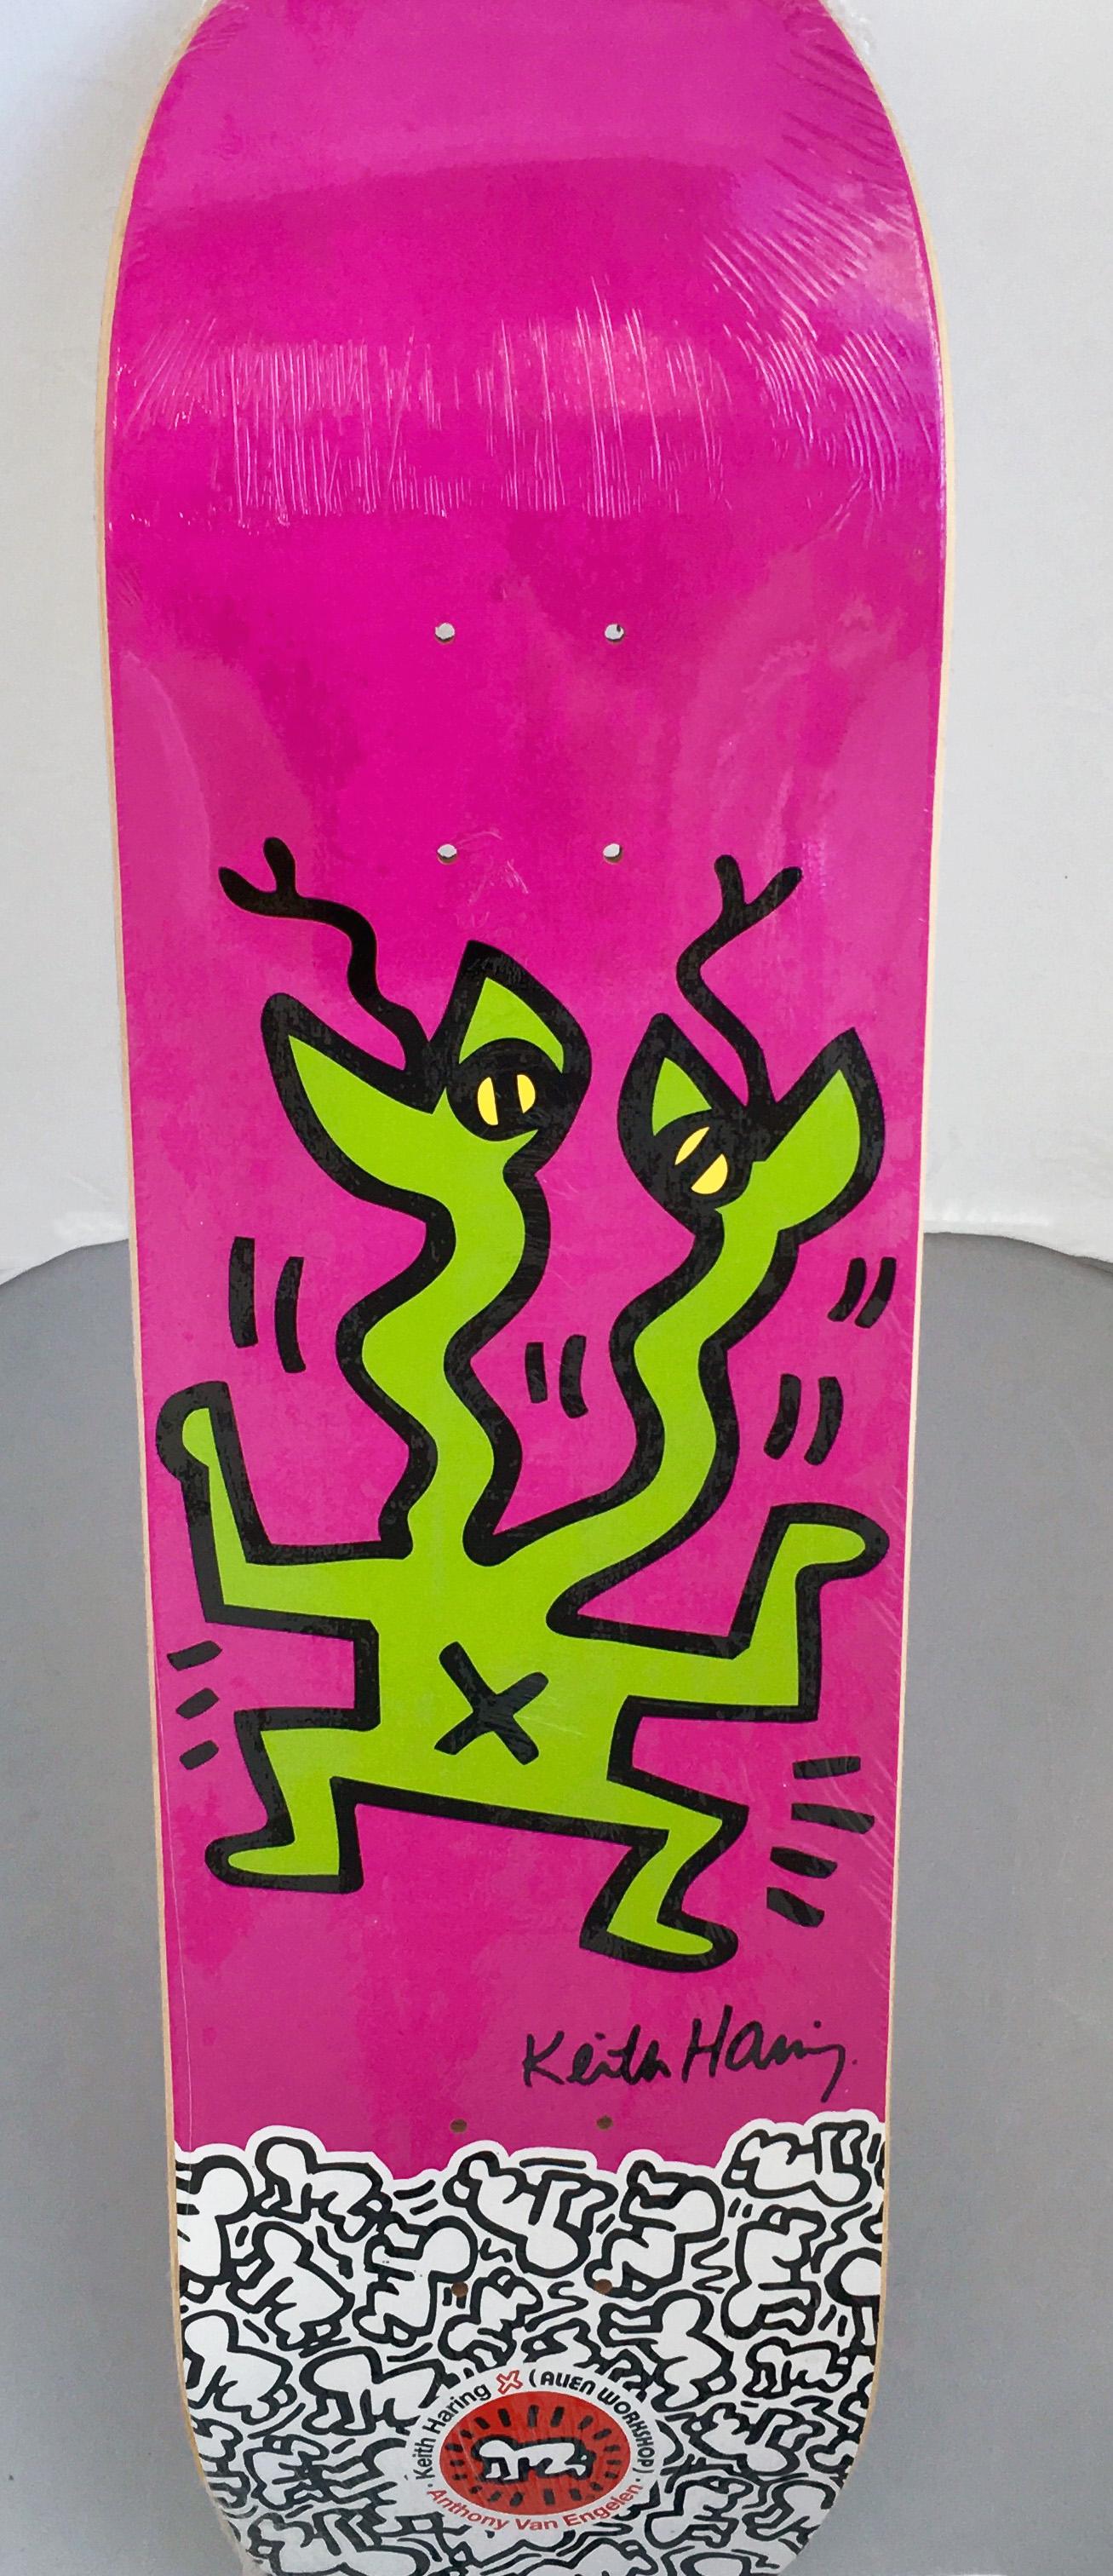 Keith Haring Skateboard Deck (Purple) - Mixed Media Art by (after) Keith Haring